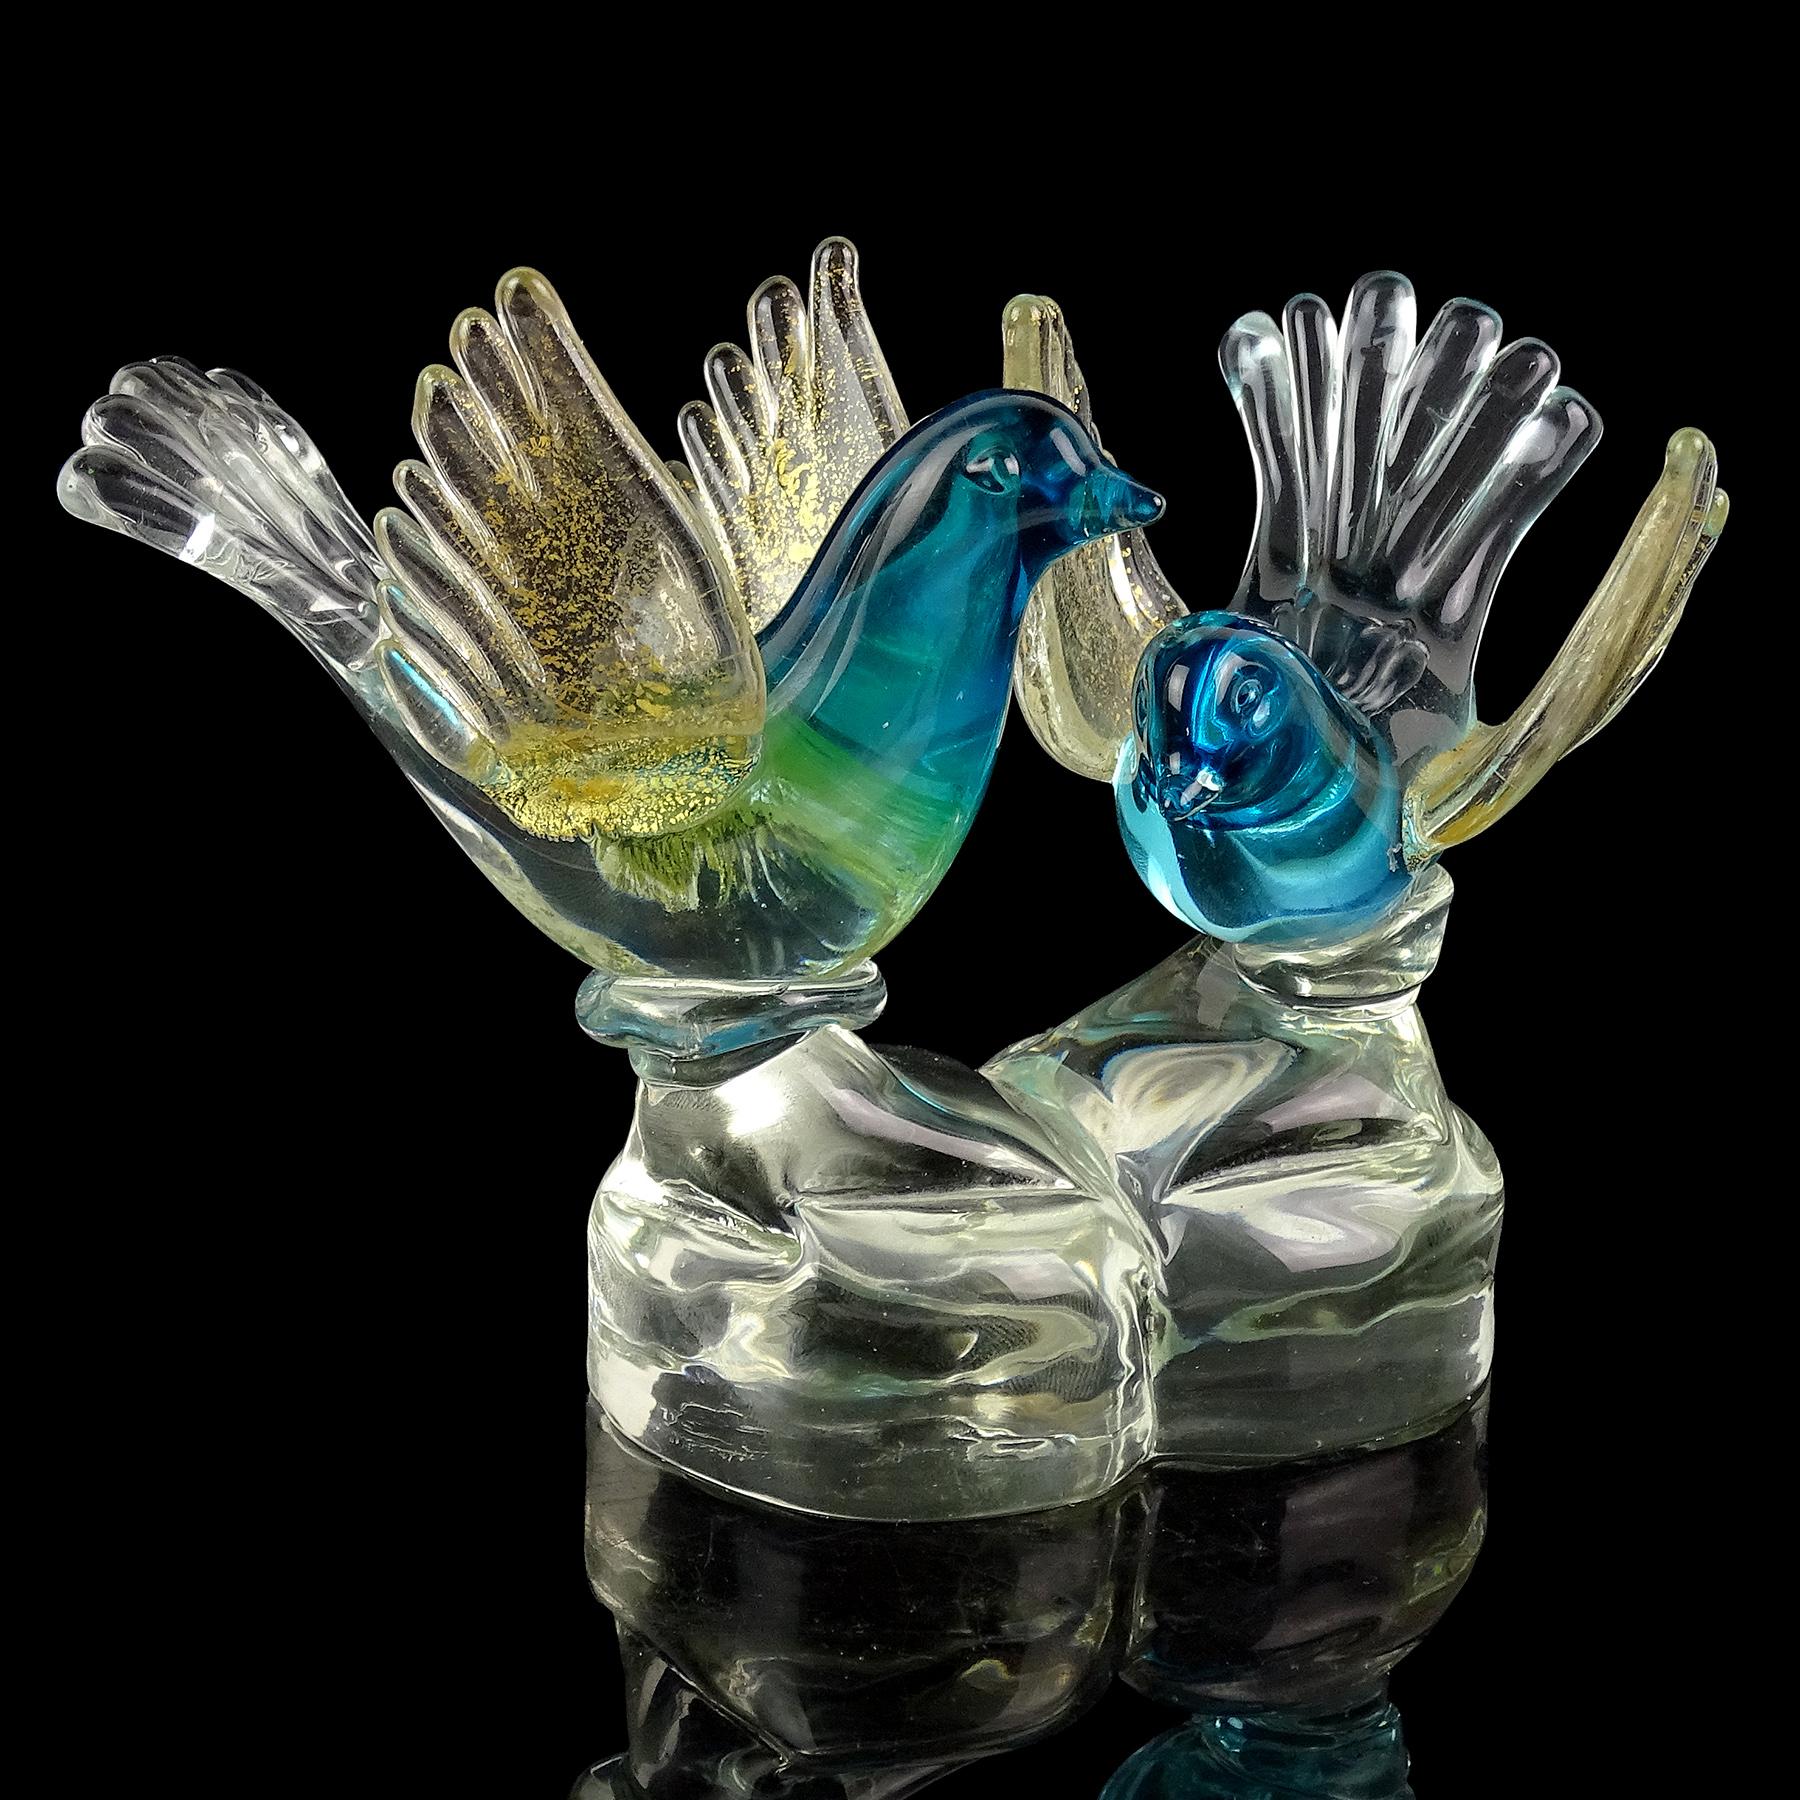 Beautiful vintage Murano hand blown Sommerso aqua blue and gold flecks Italian art glass bird figurines paperweight sculpture. Documented to designer Alfredo Barbini. They look to be a pair of courting birds, beautifully sculpted and attached to a